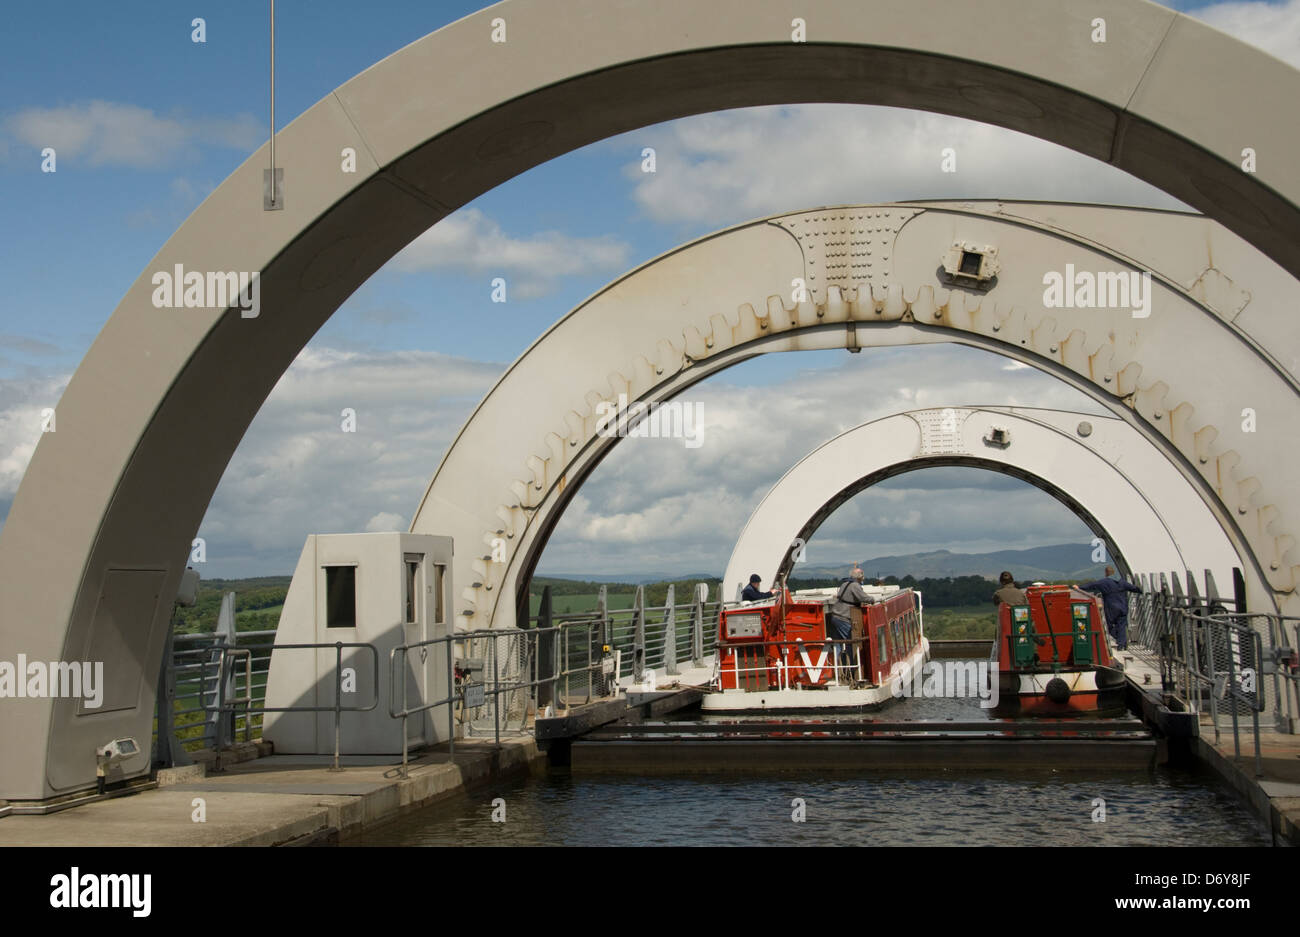 SCOTLAND; FALKIRK ; CANAL BOATS ON UPPER SECTION FALKIRK WHEEL AWAITING ROTATION FROM UNION CANAL TO FORTH CANAL BELOW Stock Photo